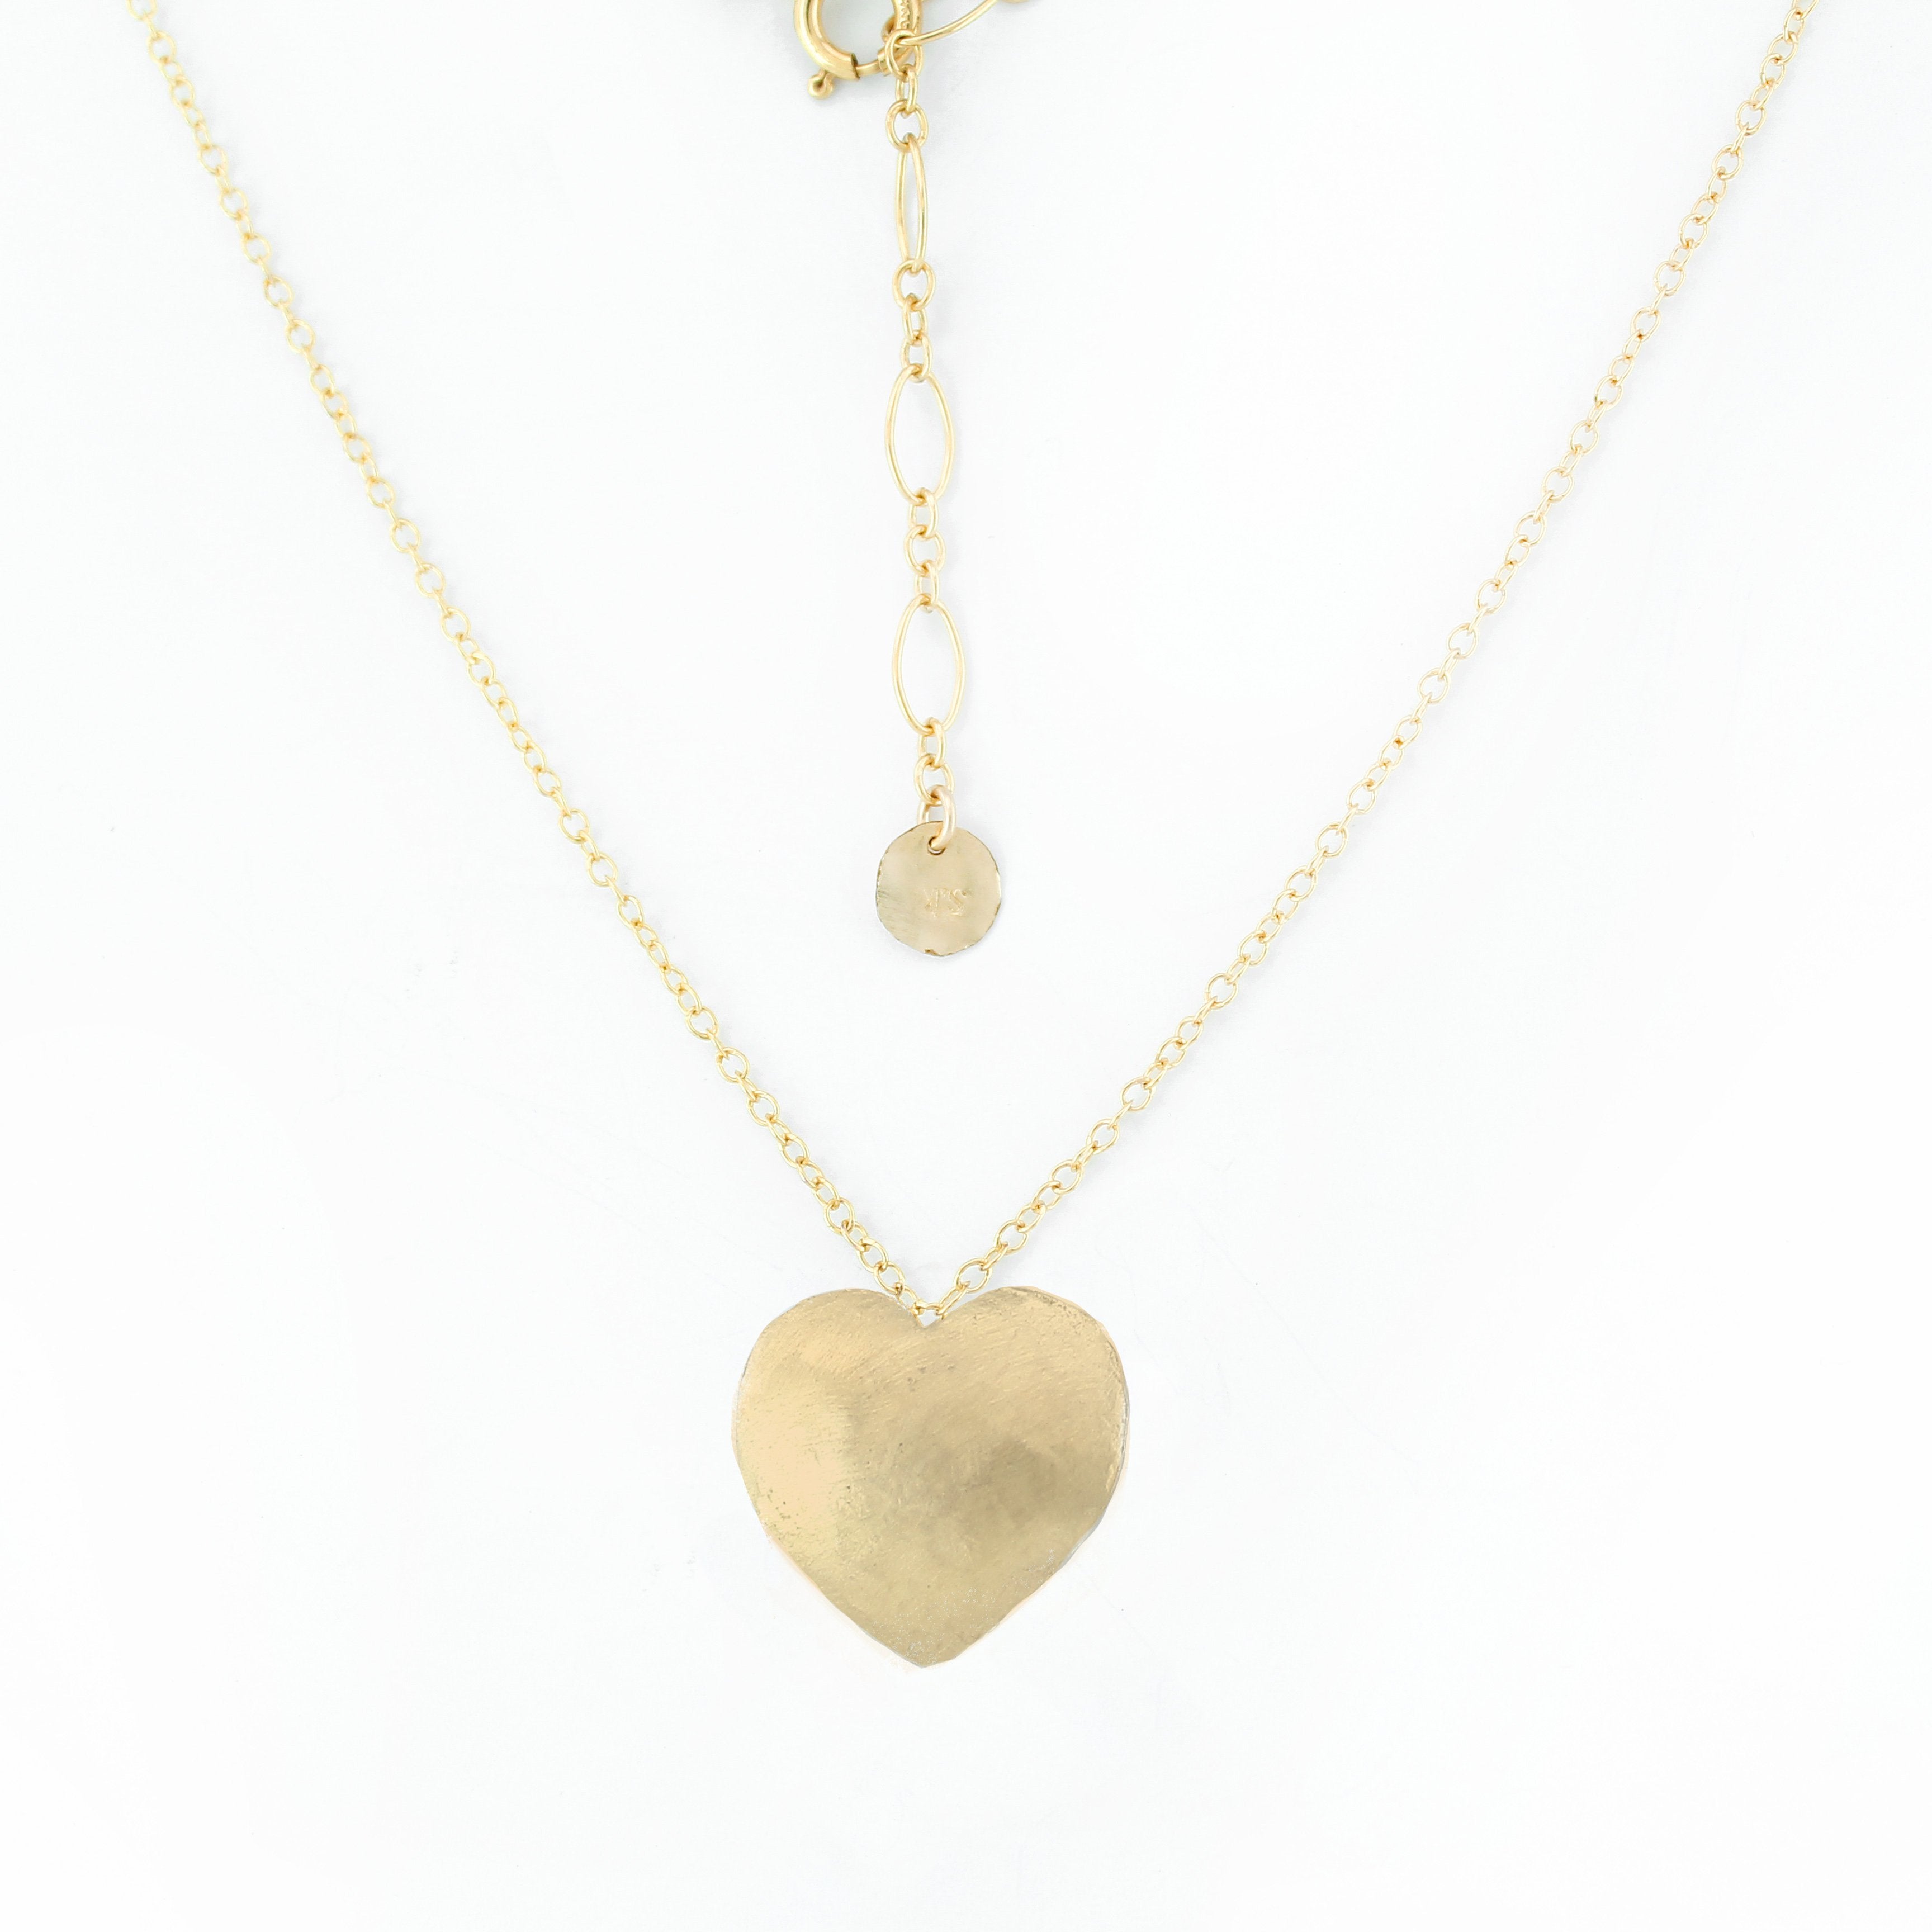 Heart 14K Gold filled Necklace - Shulamit Kanter Official Store